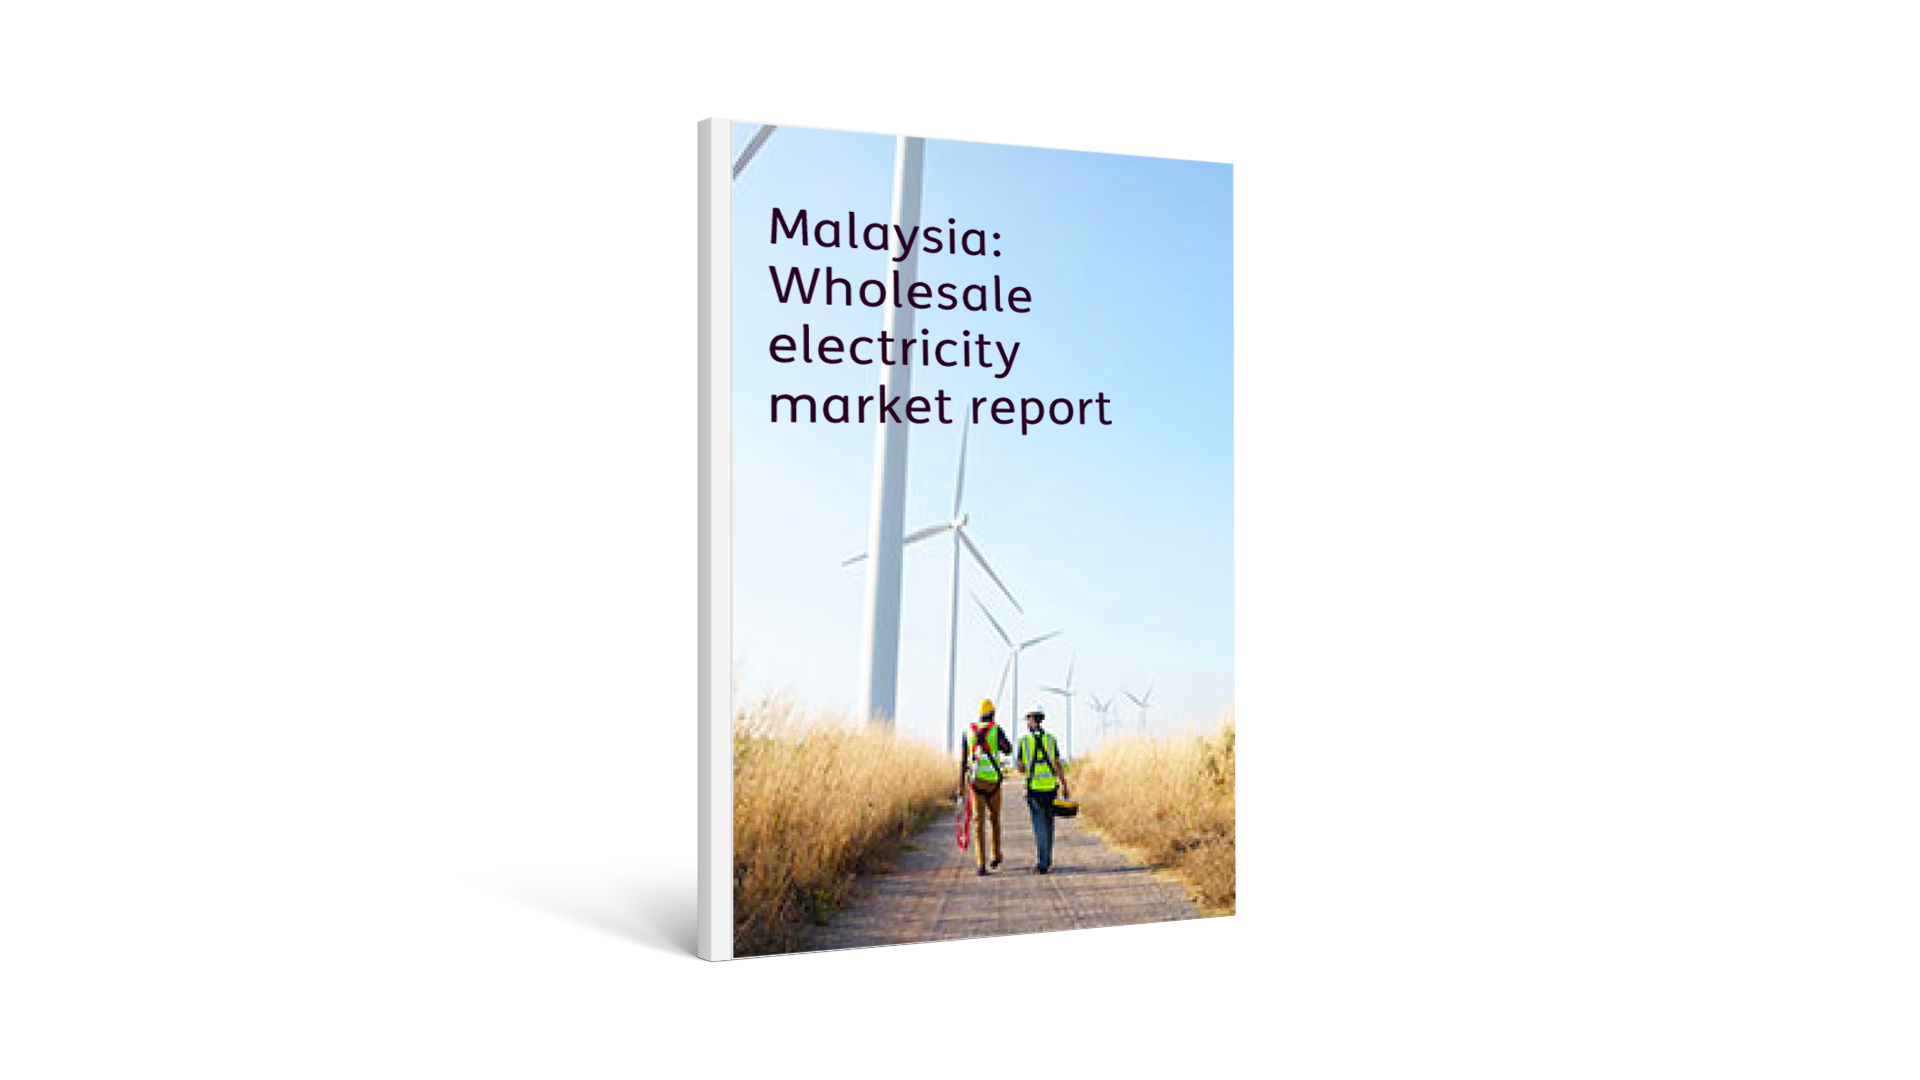 Malaysia: Wholesale electricity market report